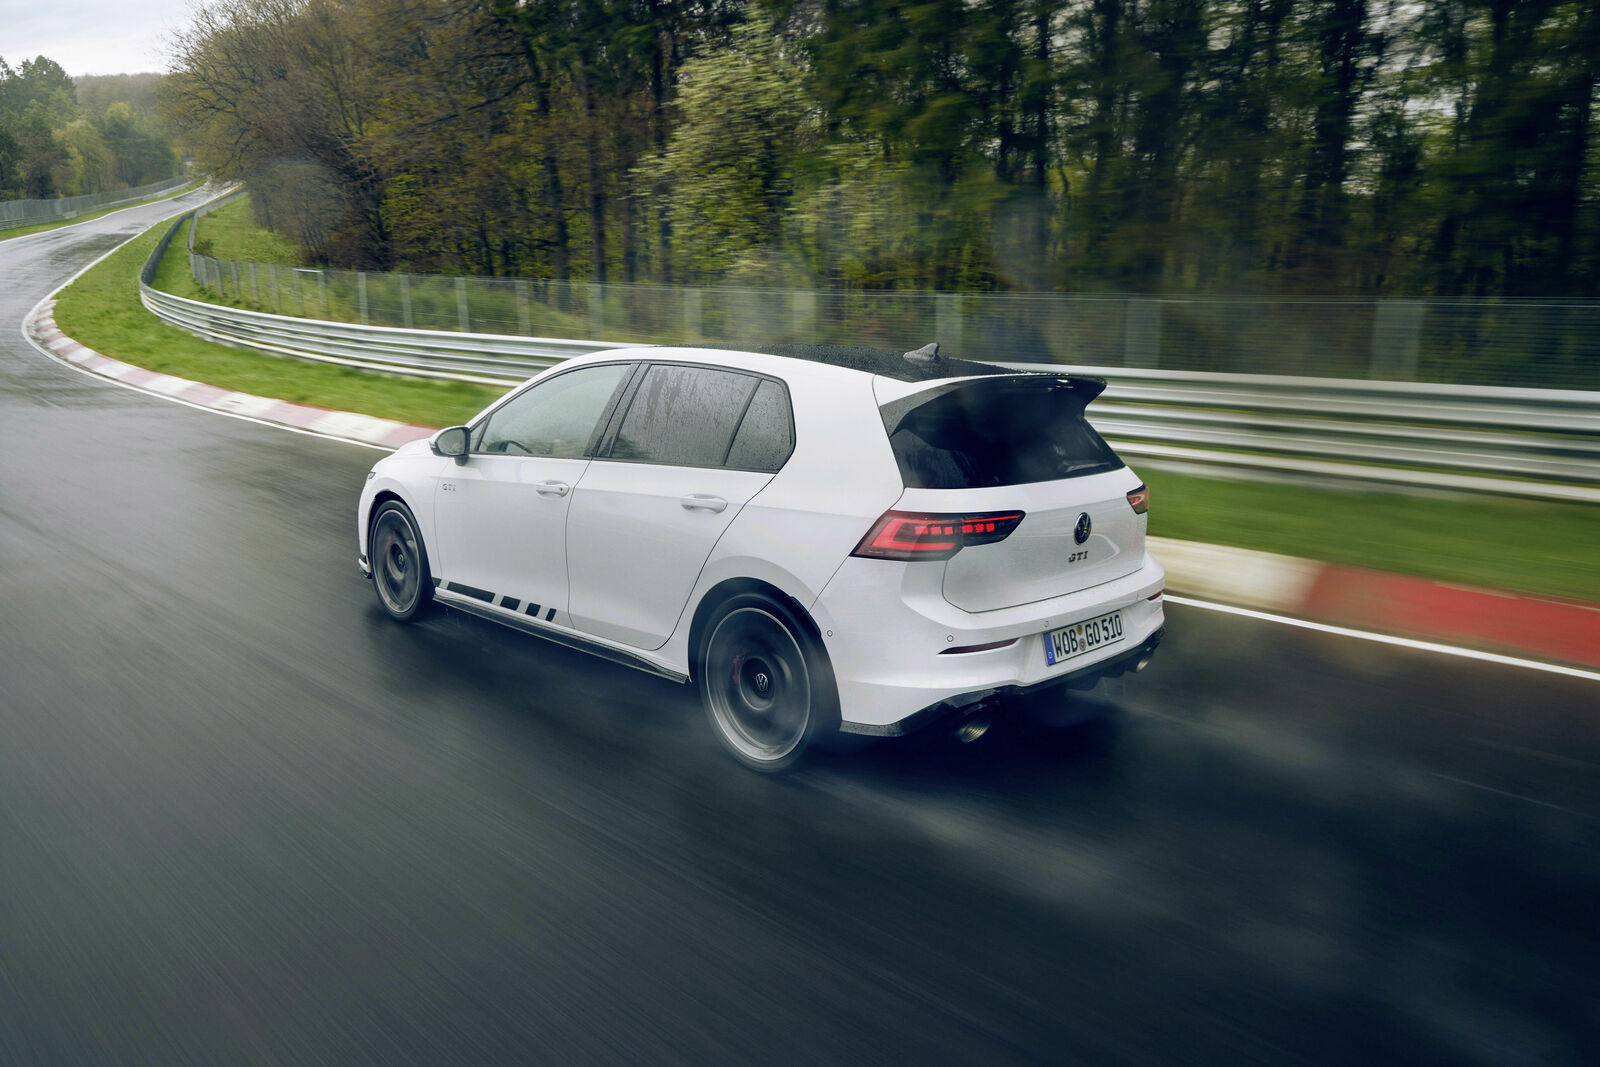 The new Golf GTI Clubsport made an exciting debut at the Nürburgring 24-Hour Race, impressing fans with its sharper design, enhanced performance, and cutting-edge features.